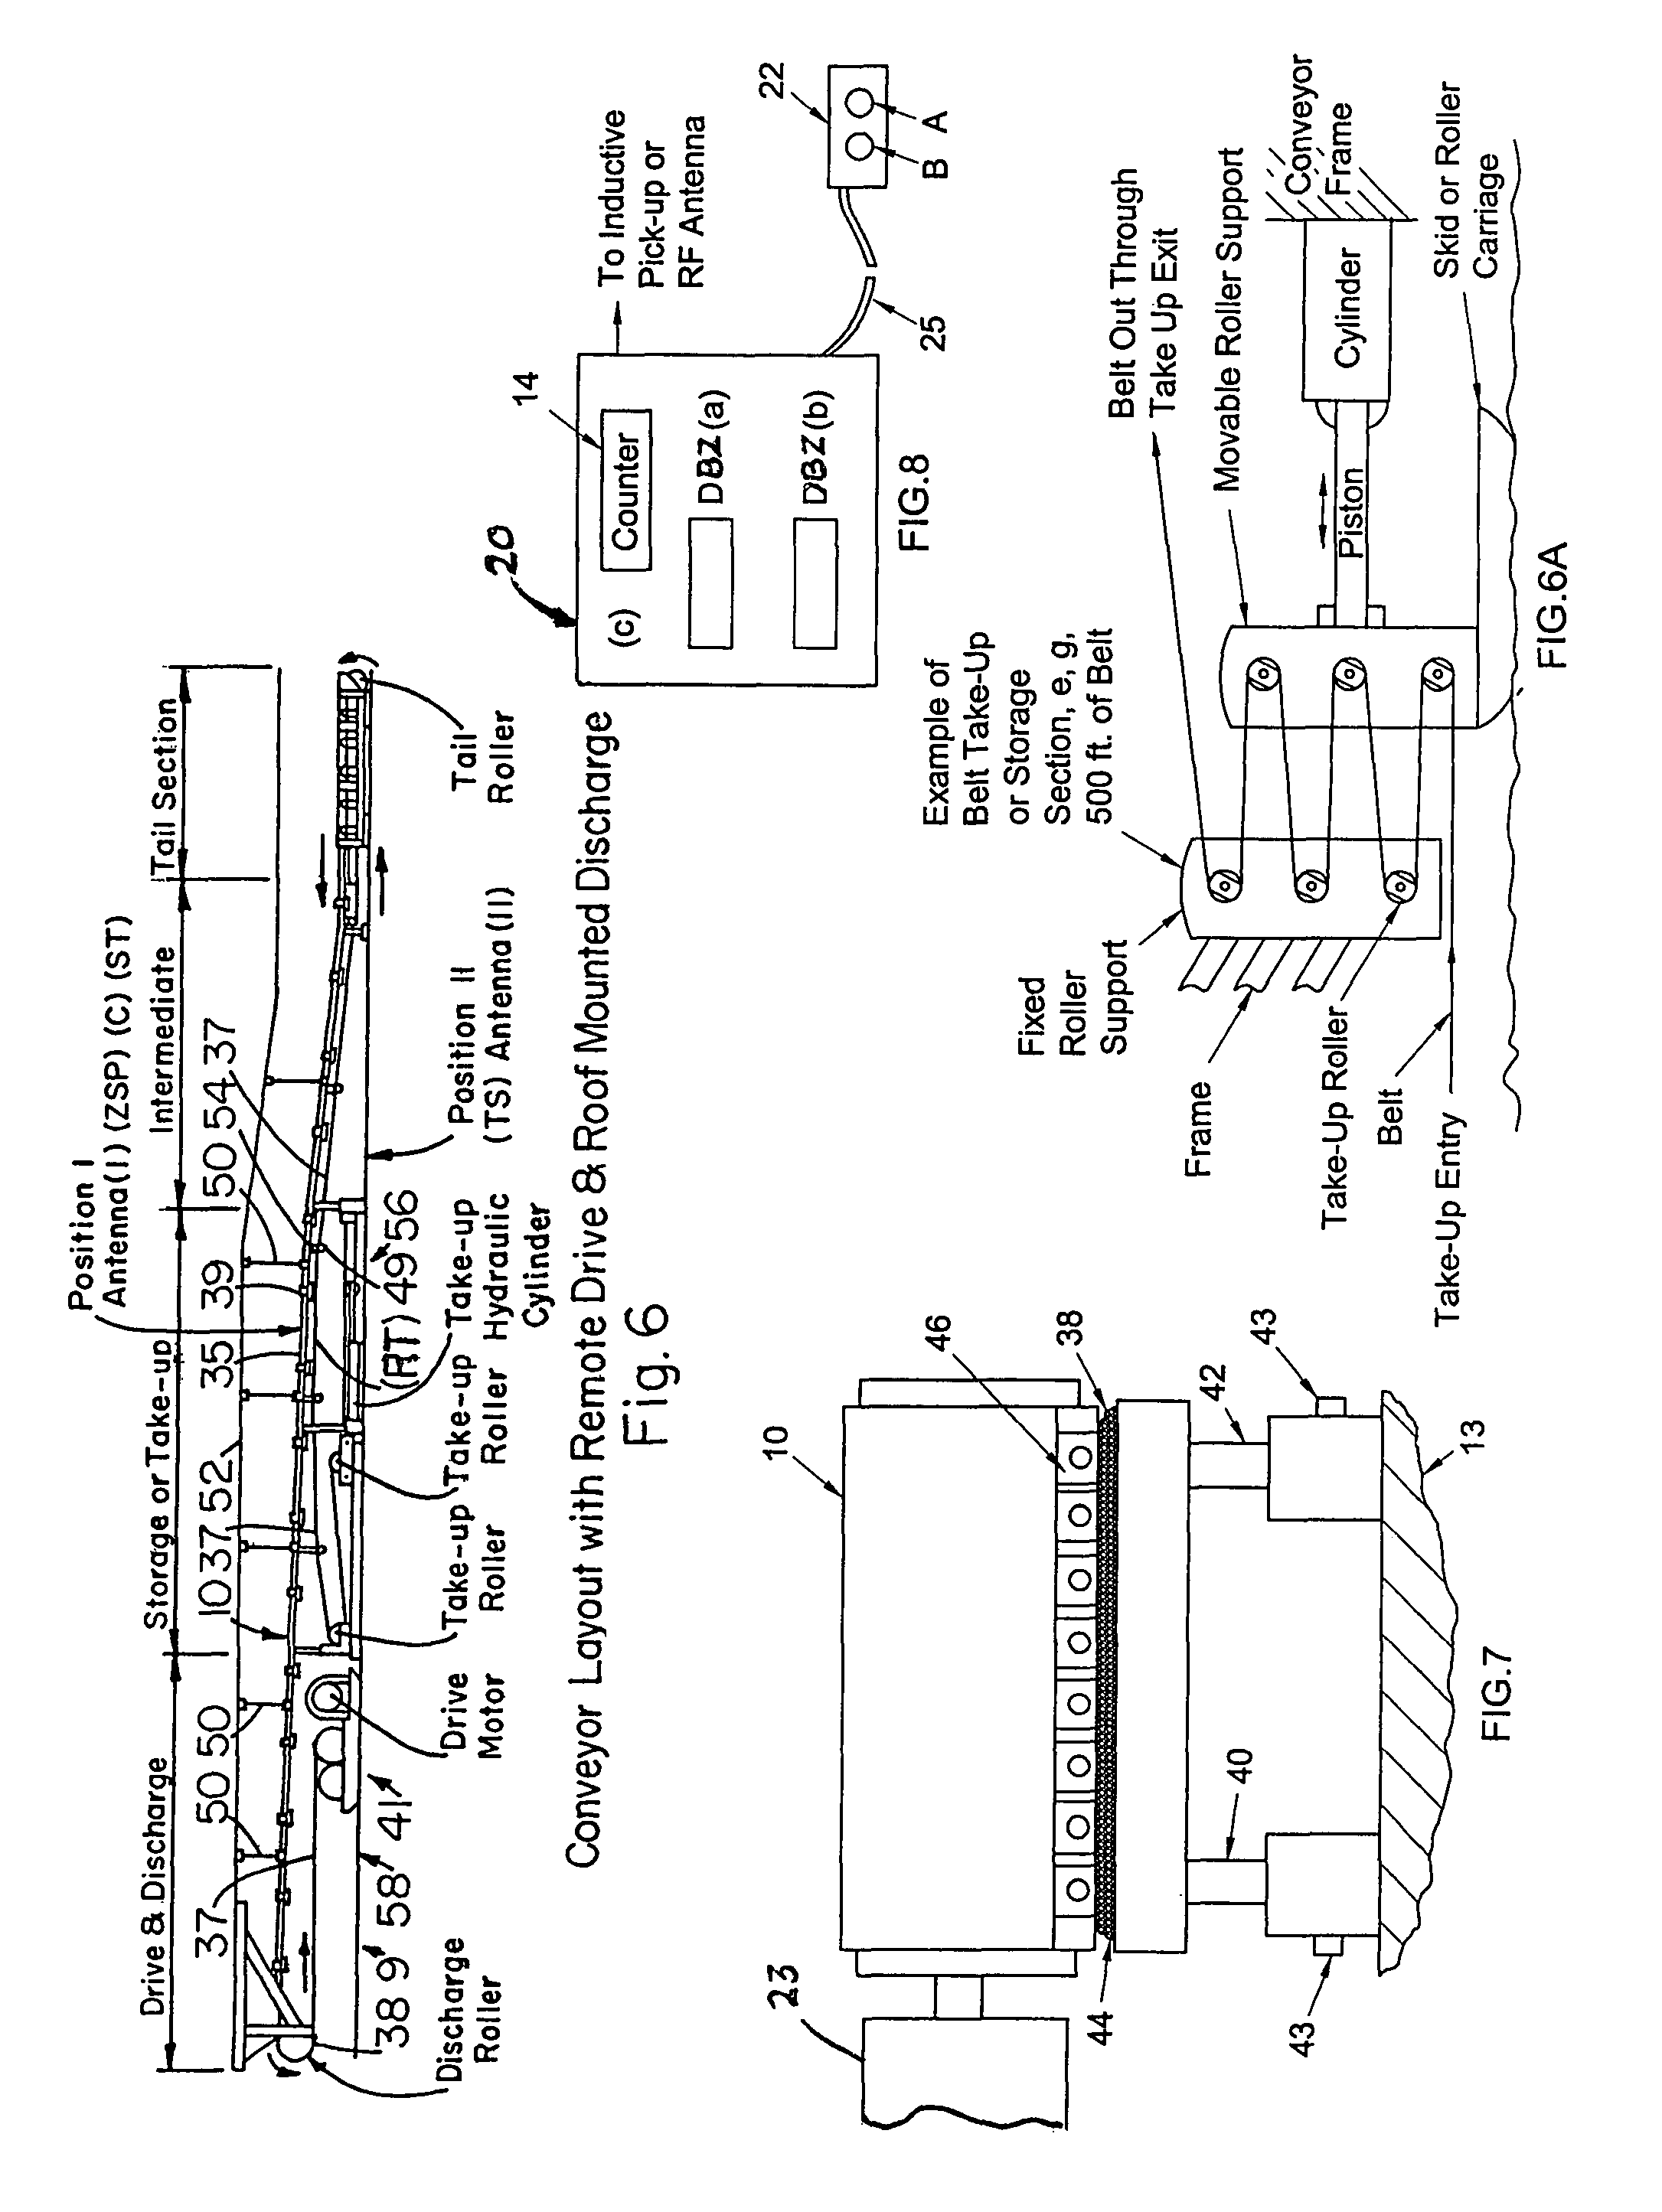 Method and apparatus for monitoring and controlling conveyor position